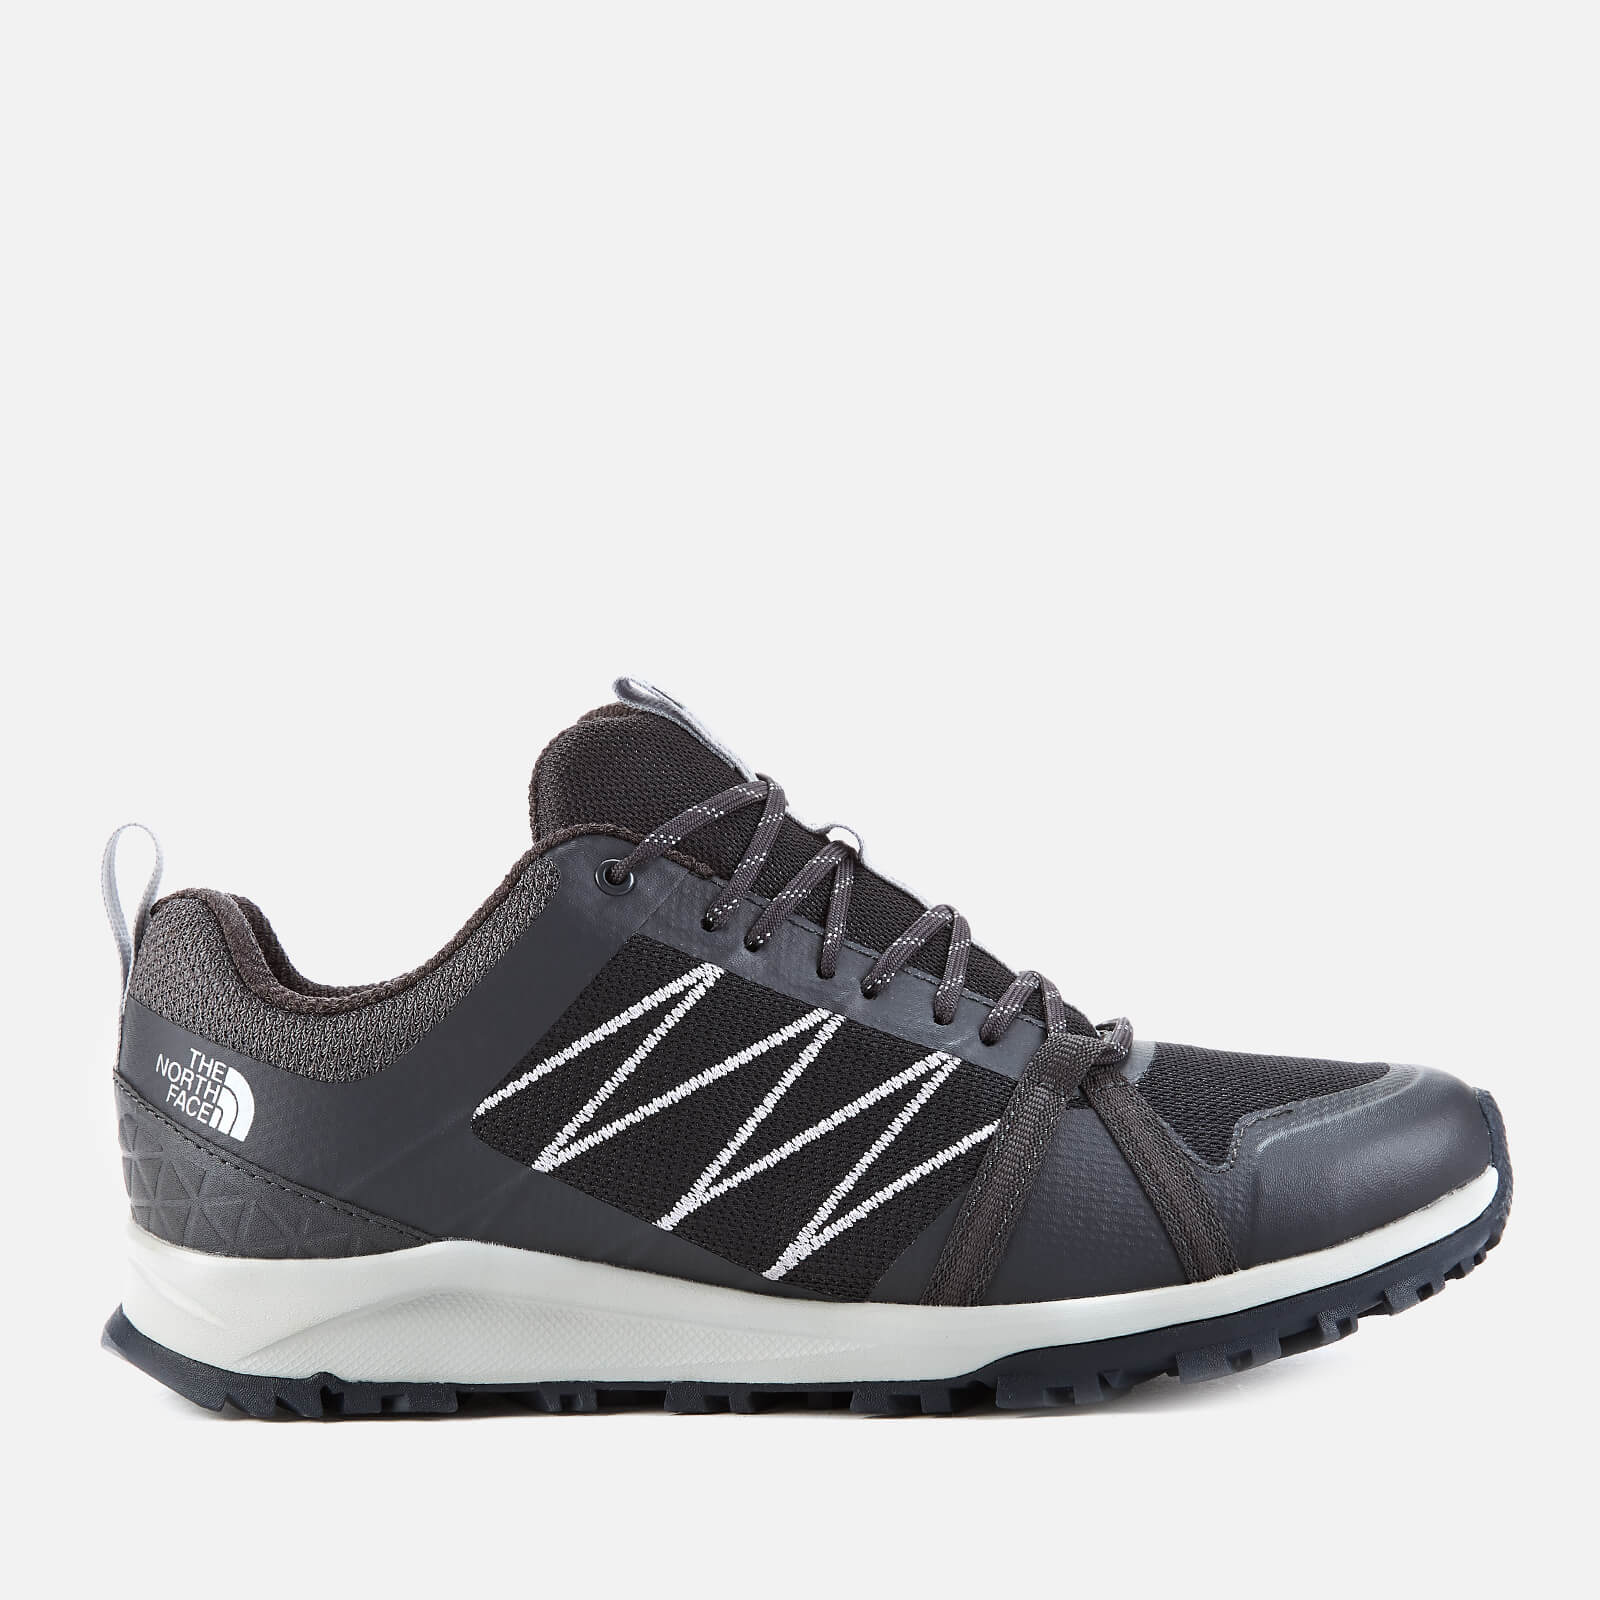 The North Face Men's Litewave Fastpack 2 Trainers - Ebony Grey/High Rise Grey